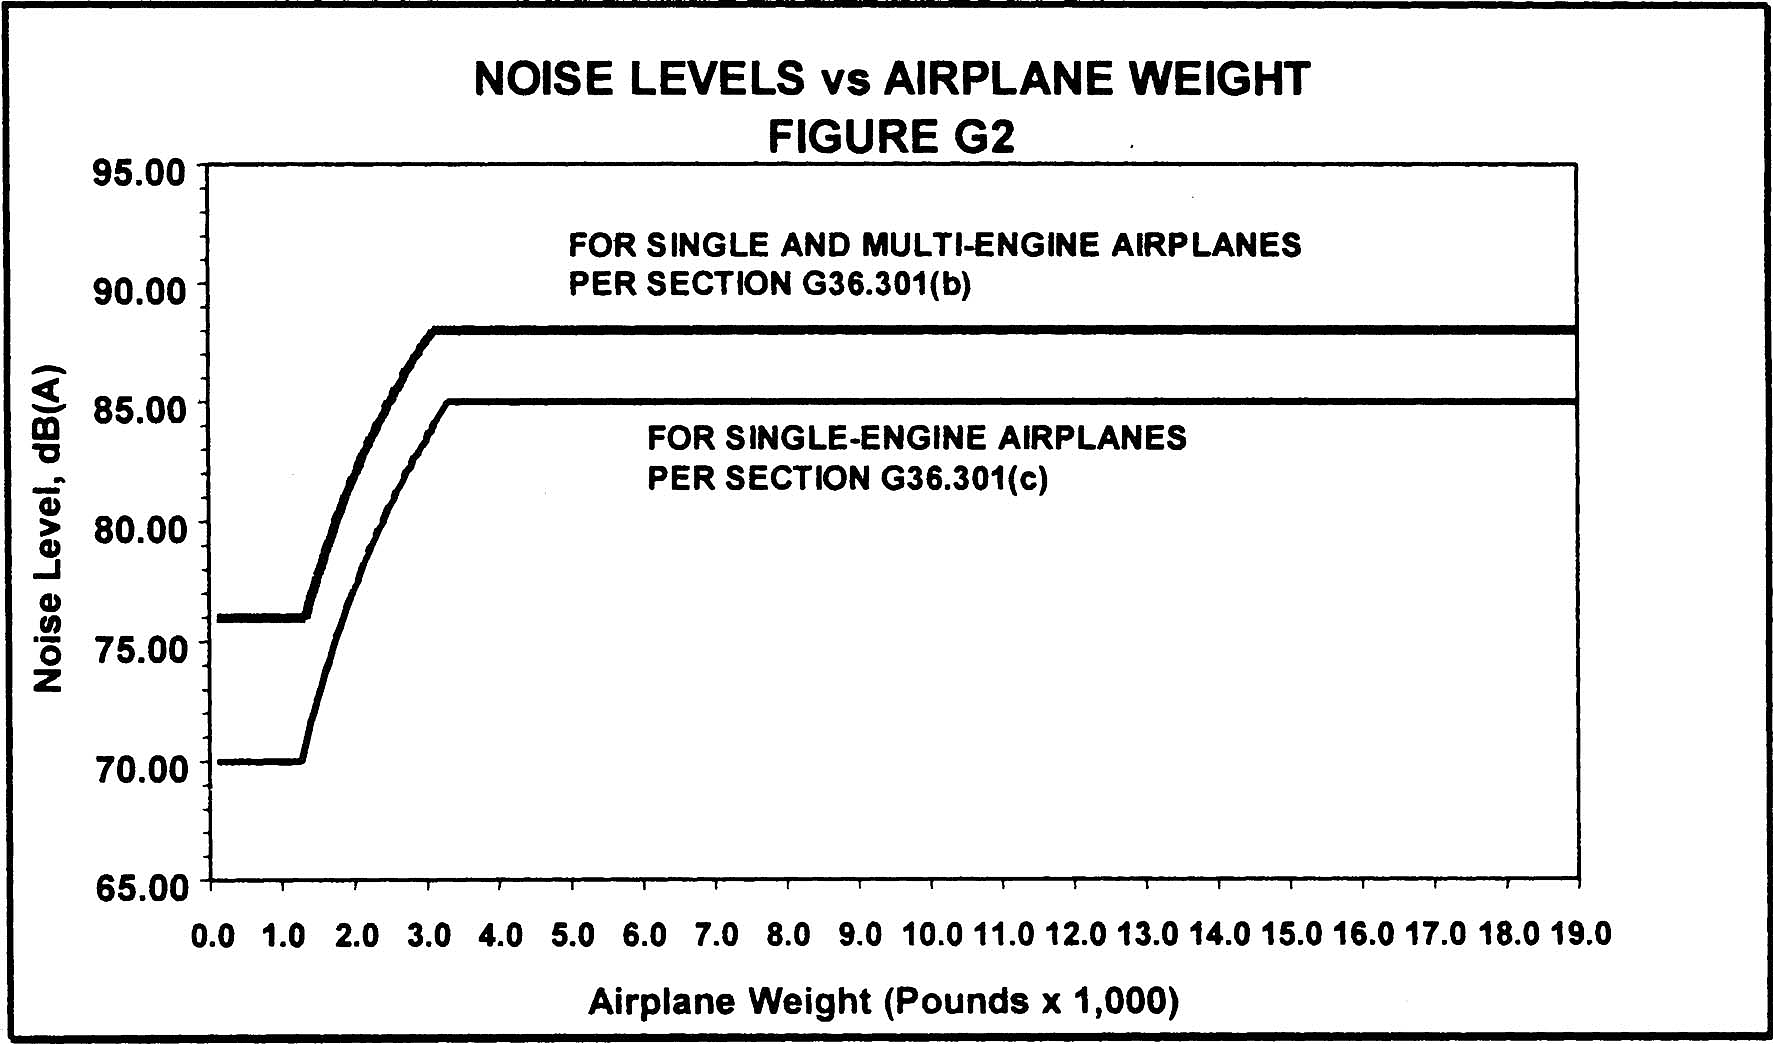 Graphic of (c) For single-engine airplanes for which the original type certification application is received on or after February 3, 2006, the noise level must not exceed 70dB(A) for aircraft having a maximum certificated takeoff weight of 1,257 pounds (570 kg) or less. For aircraft weights greater than 1,257 pounds, the noise limit increases from that point with the logarithm of airplane weight at the rate of 10.75dB(A) per doubling of weight, until the limit of 85dB(A) is reached, after which the limit is constant up to and including 19,000 pounds (8,618 kg). Figure G2 depicts noise level limits for airplane weights for single-engine airplanes.